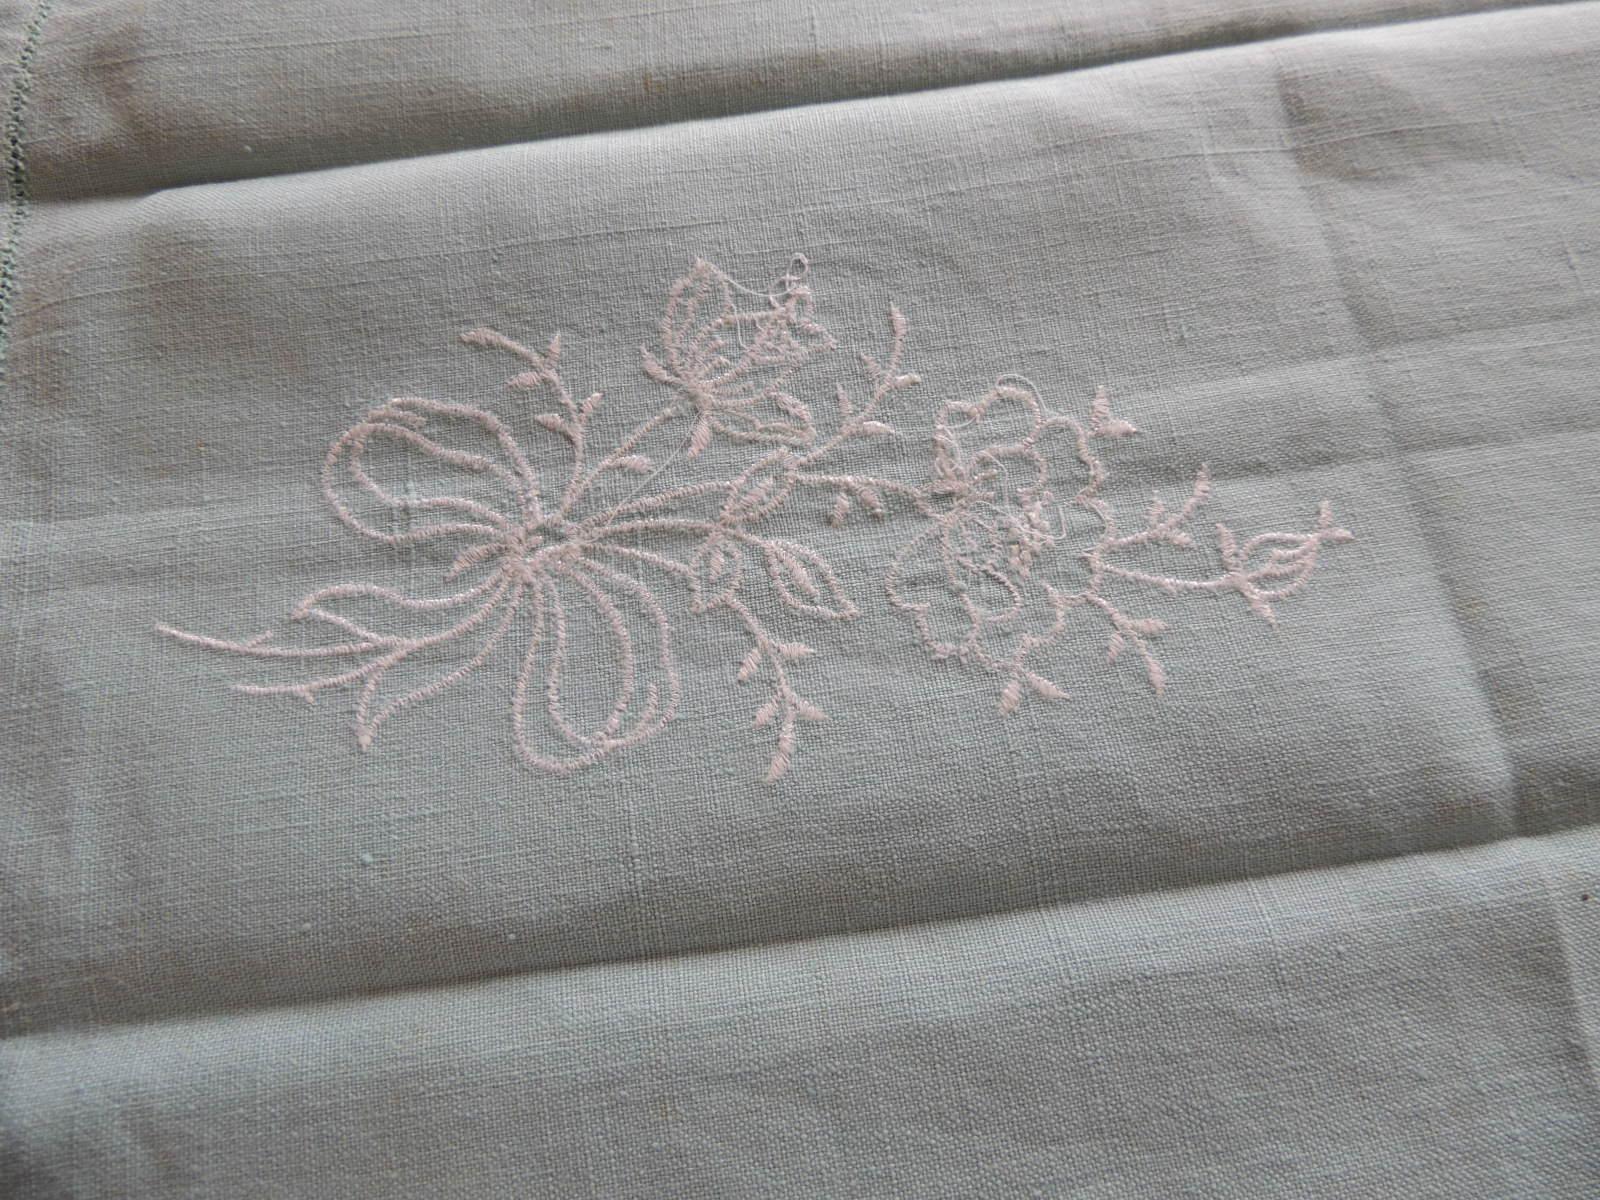 Vintage green and white embroidered flower linen guest towel
Size: 18 x 11 x 0.03
1990's
USA.